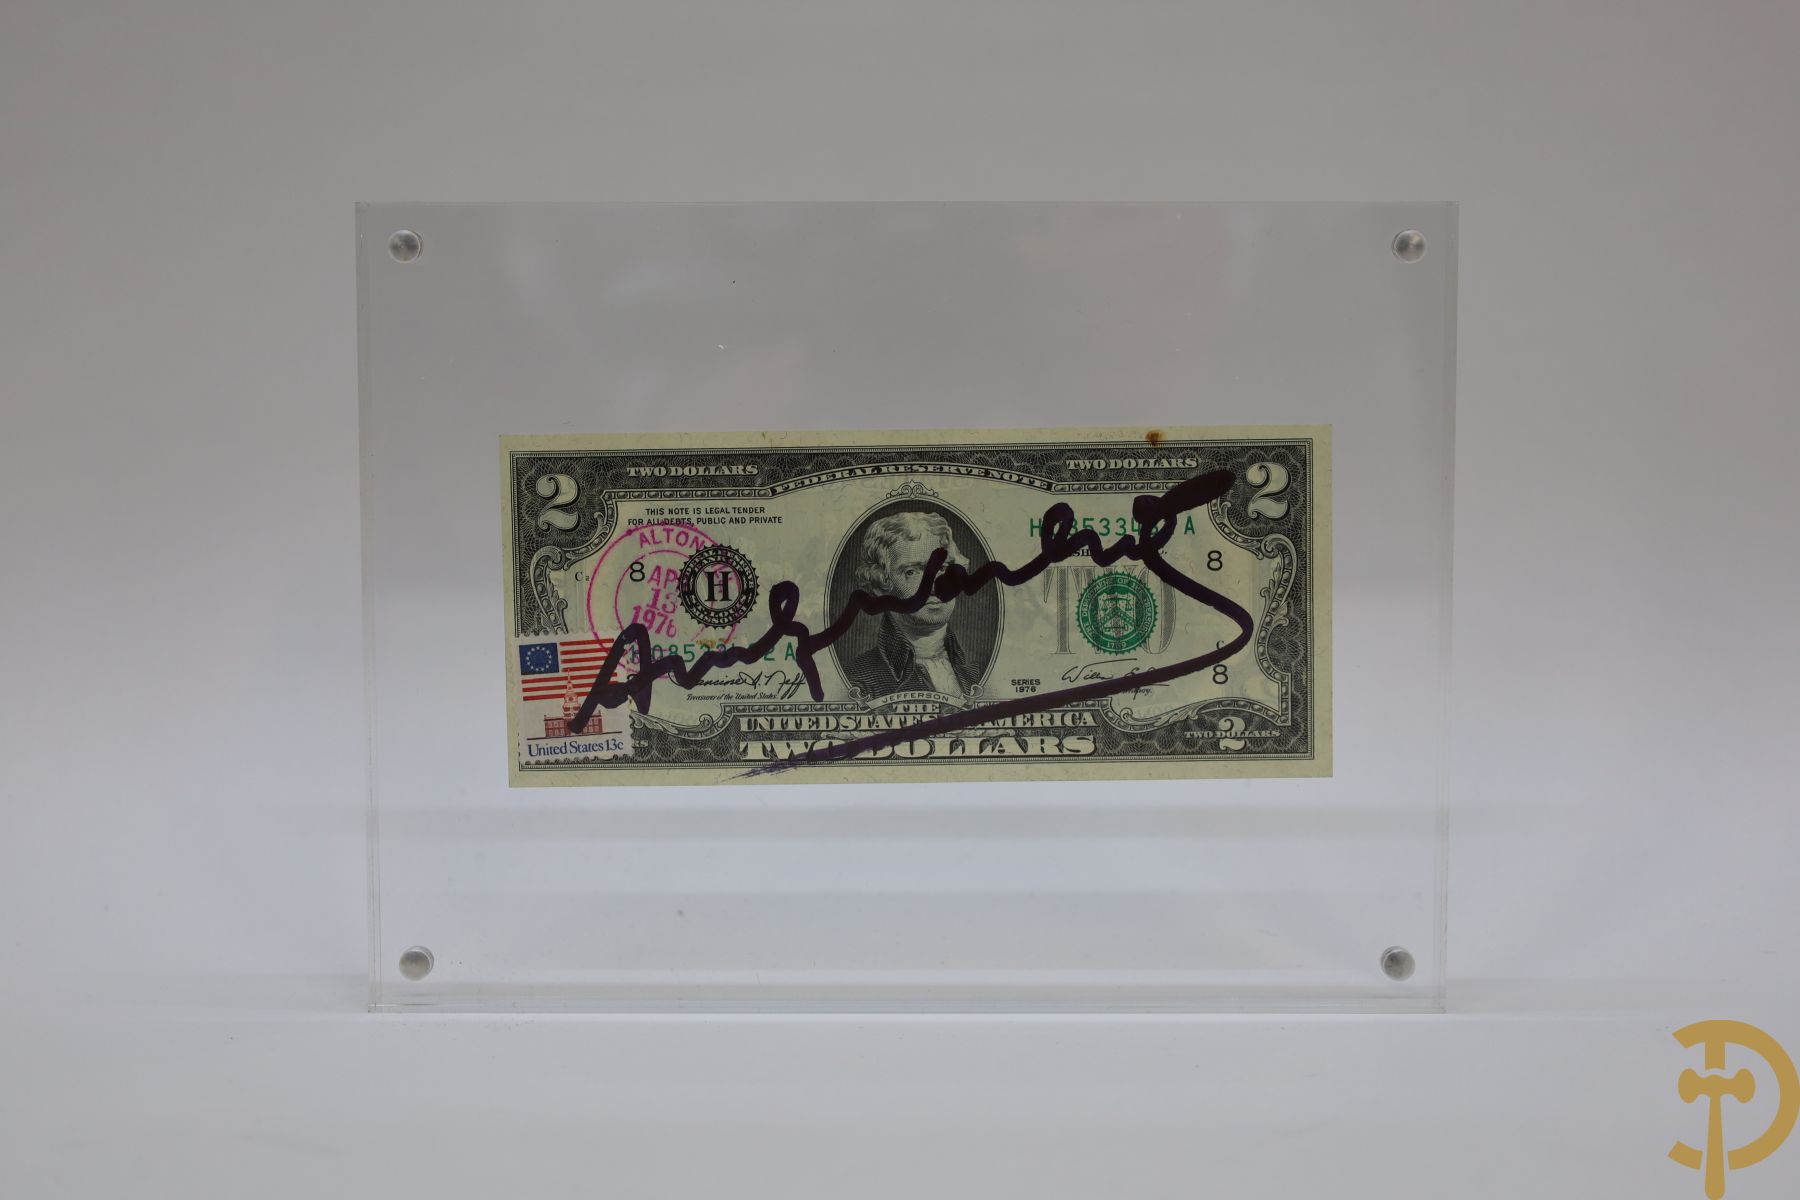 Warhol Andy getekend op Amerikaans 2 dollar biljet  
Serial Number: H08533432A
Year: 1976
Stamp and stamp of the American post office dated April 13, 1976 
Factory Warhol stamp on the back